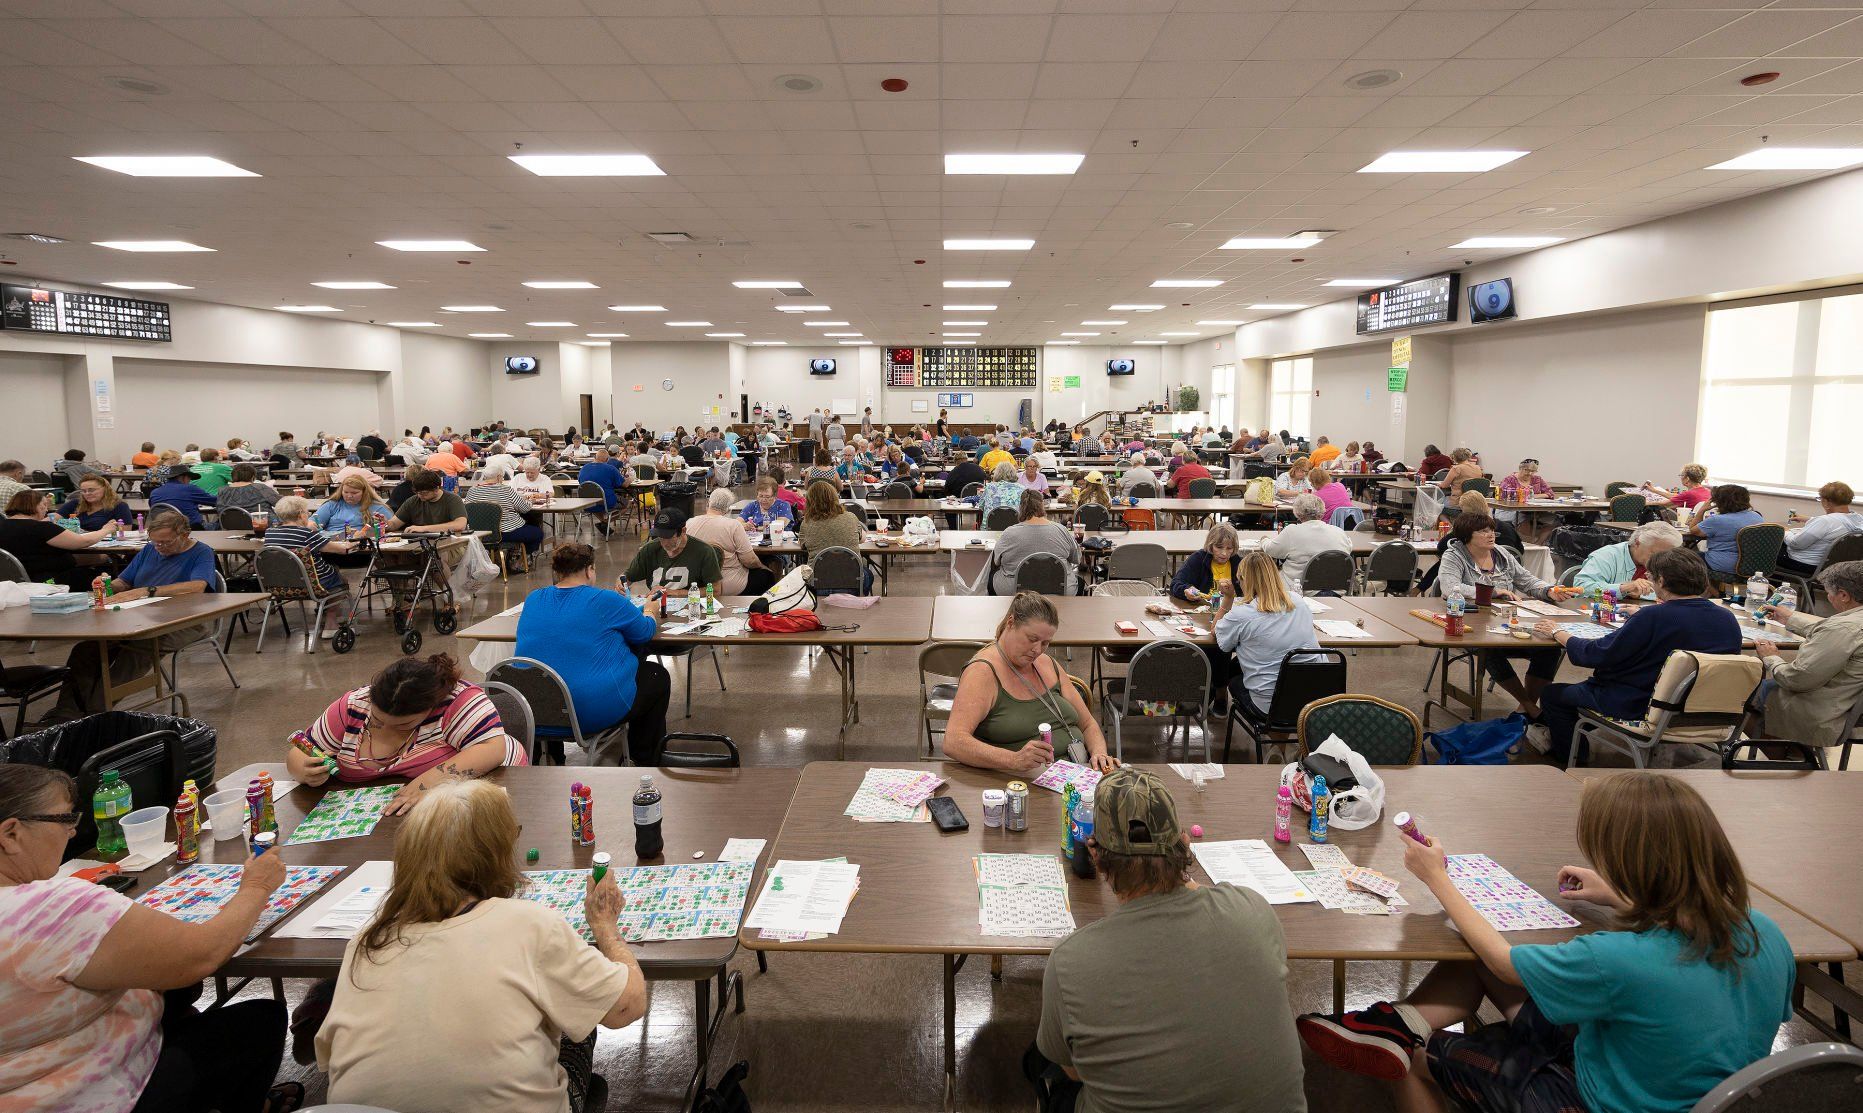 Bingo night at the Tri-State Independent Blind Society in Dubuque on Wednesday, July 3, 2022.    PHOTO CREDIT: Stephen Gassman